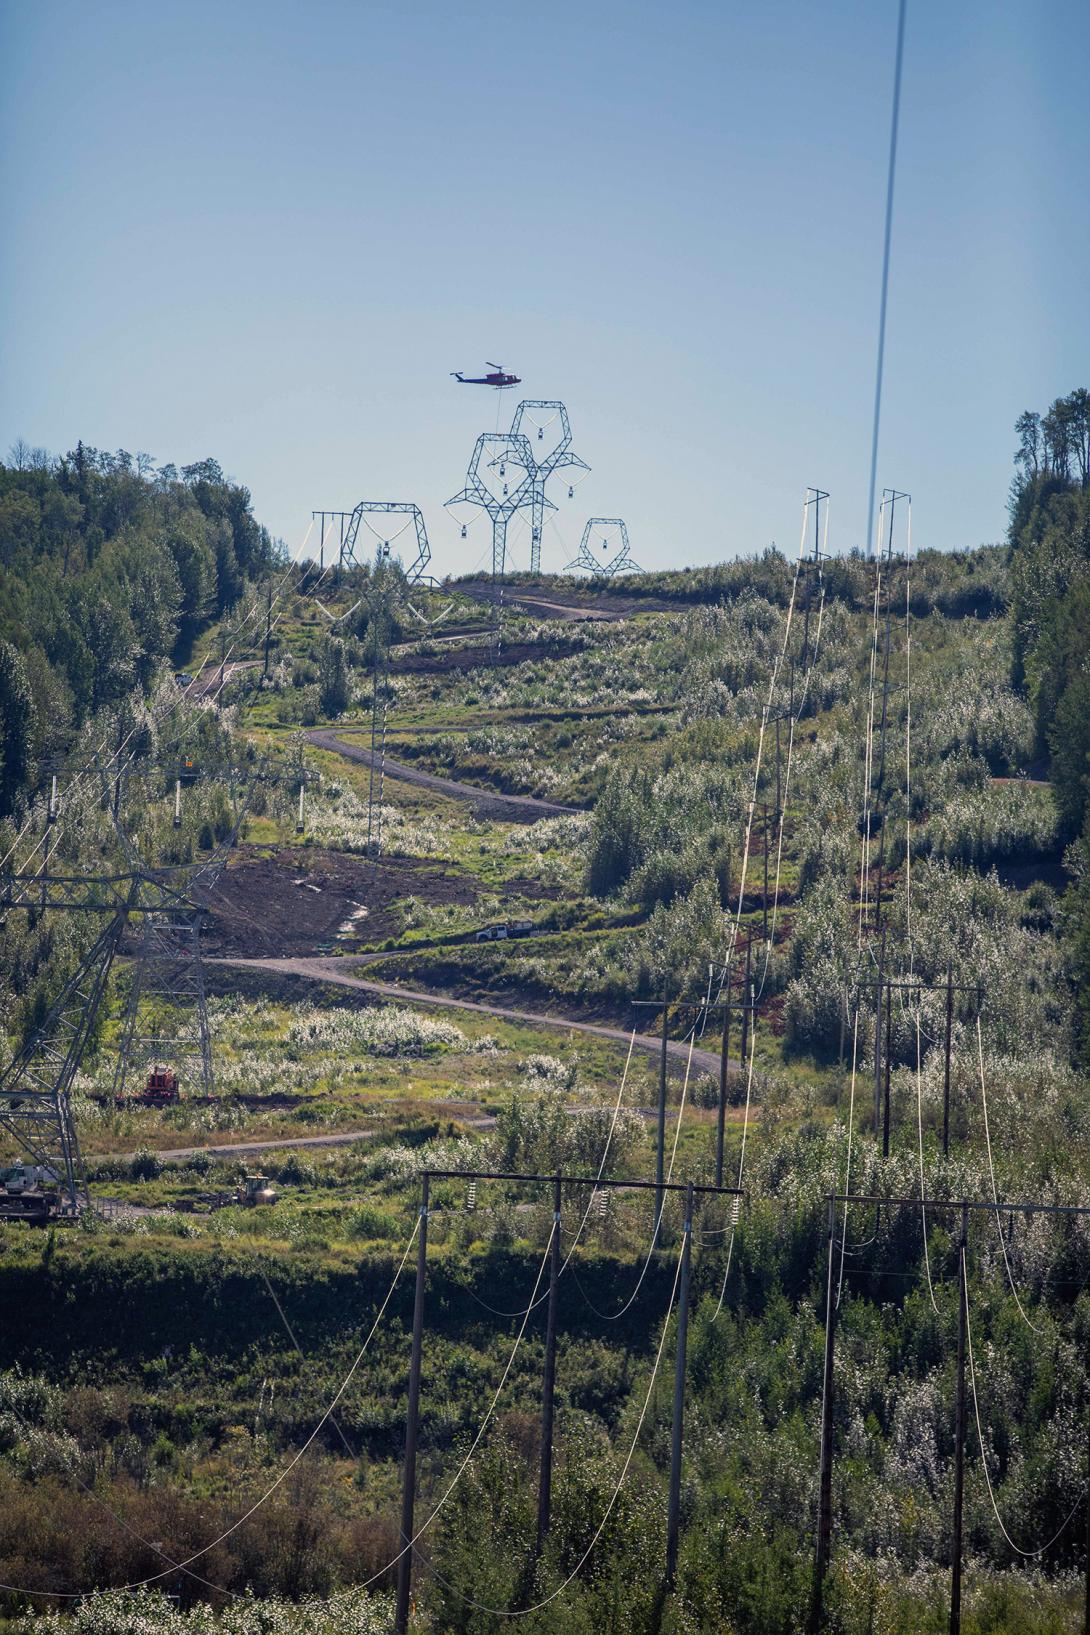 A helicopter installs the sock line on the 500 kilovolt transmission towers near Peace Canyon Dam. | August 2020